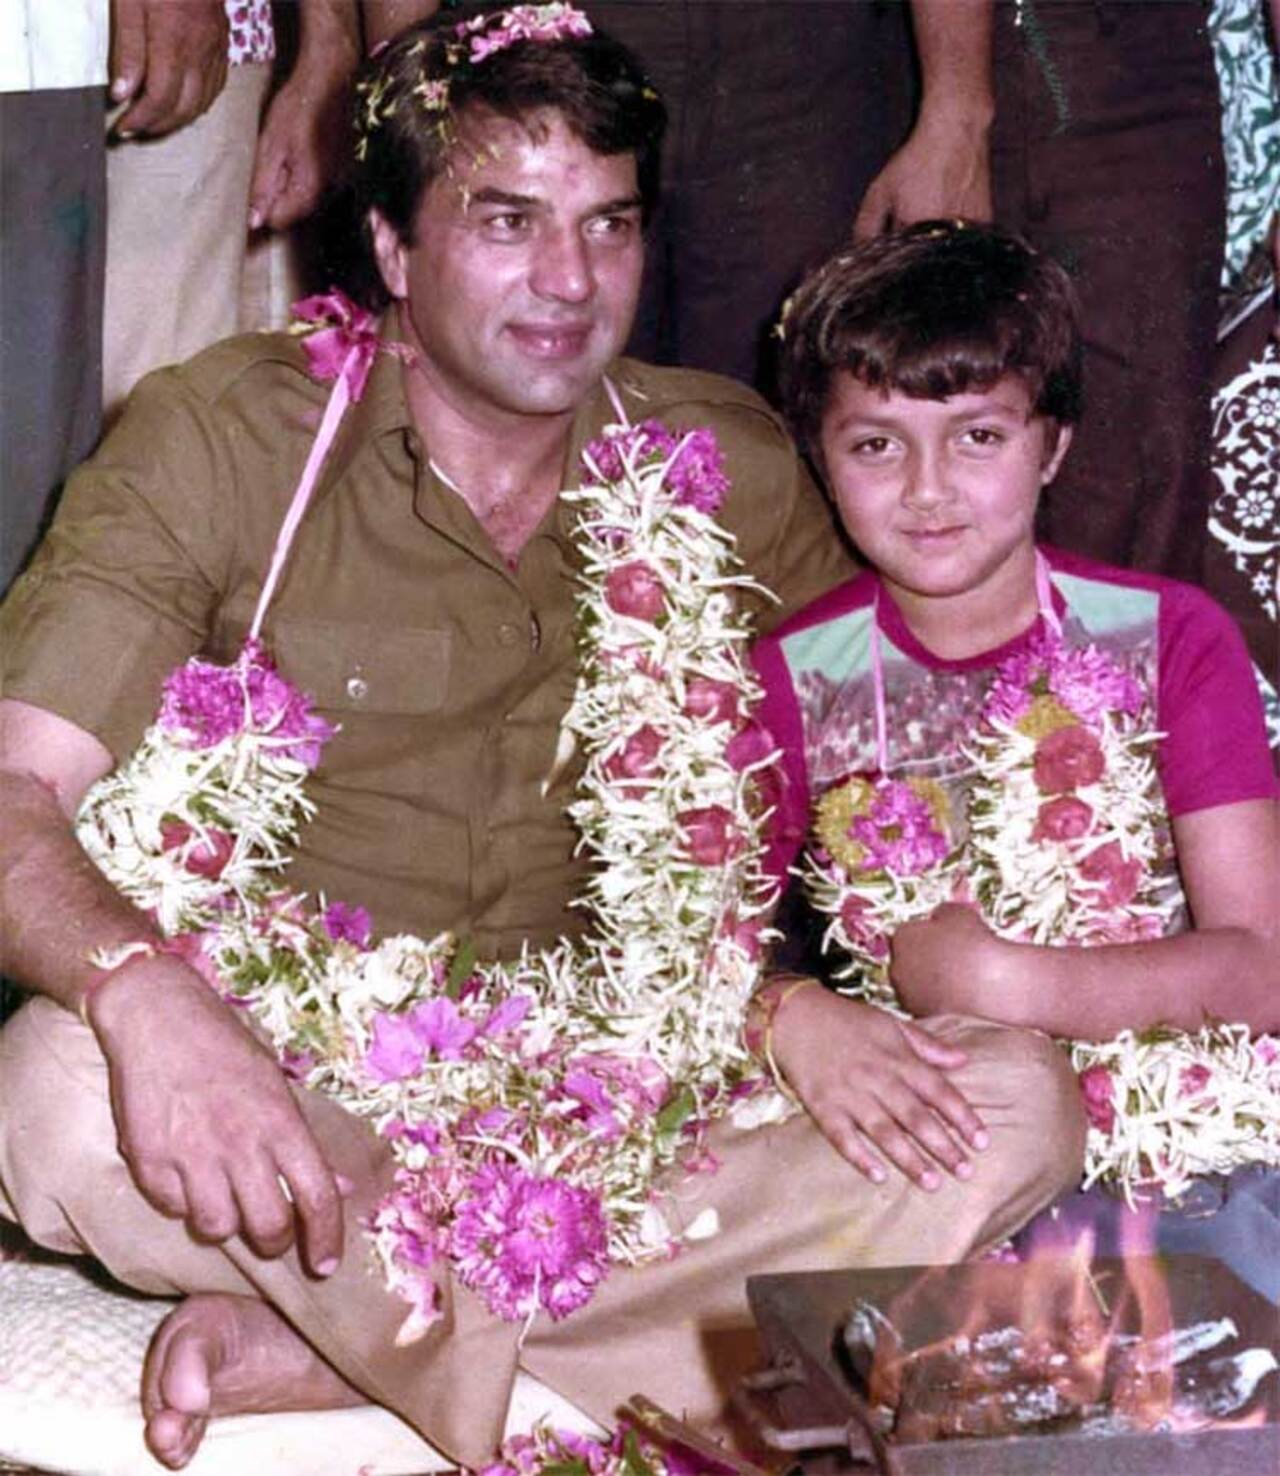 Bobby Deol posted a charming throwback photo with his father, Dharmendra, on Instagram to celebrate the latter's birthday. In the picture, a young Bobby is seen giving a bashful smile to the camera.